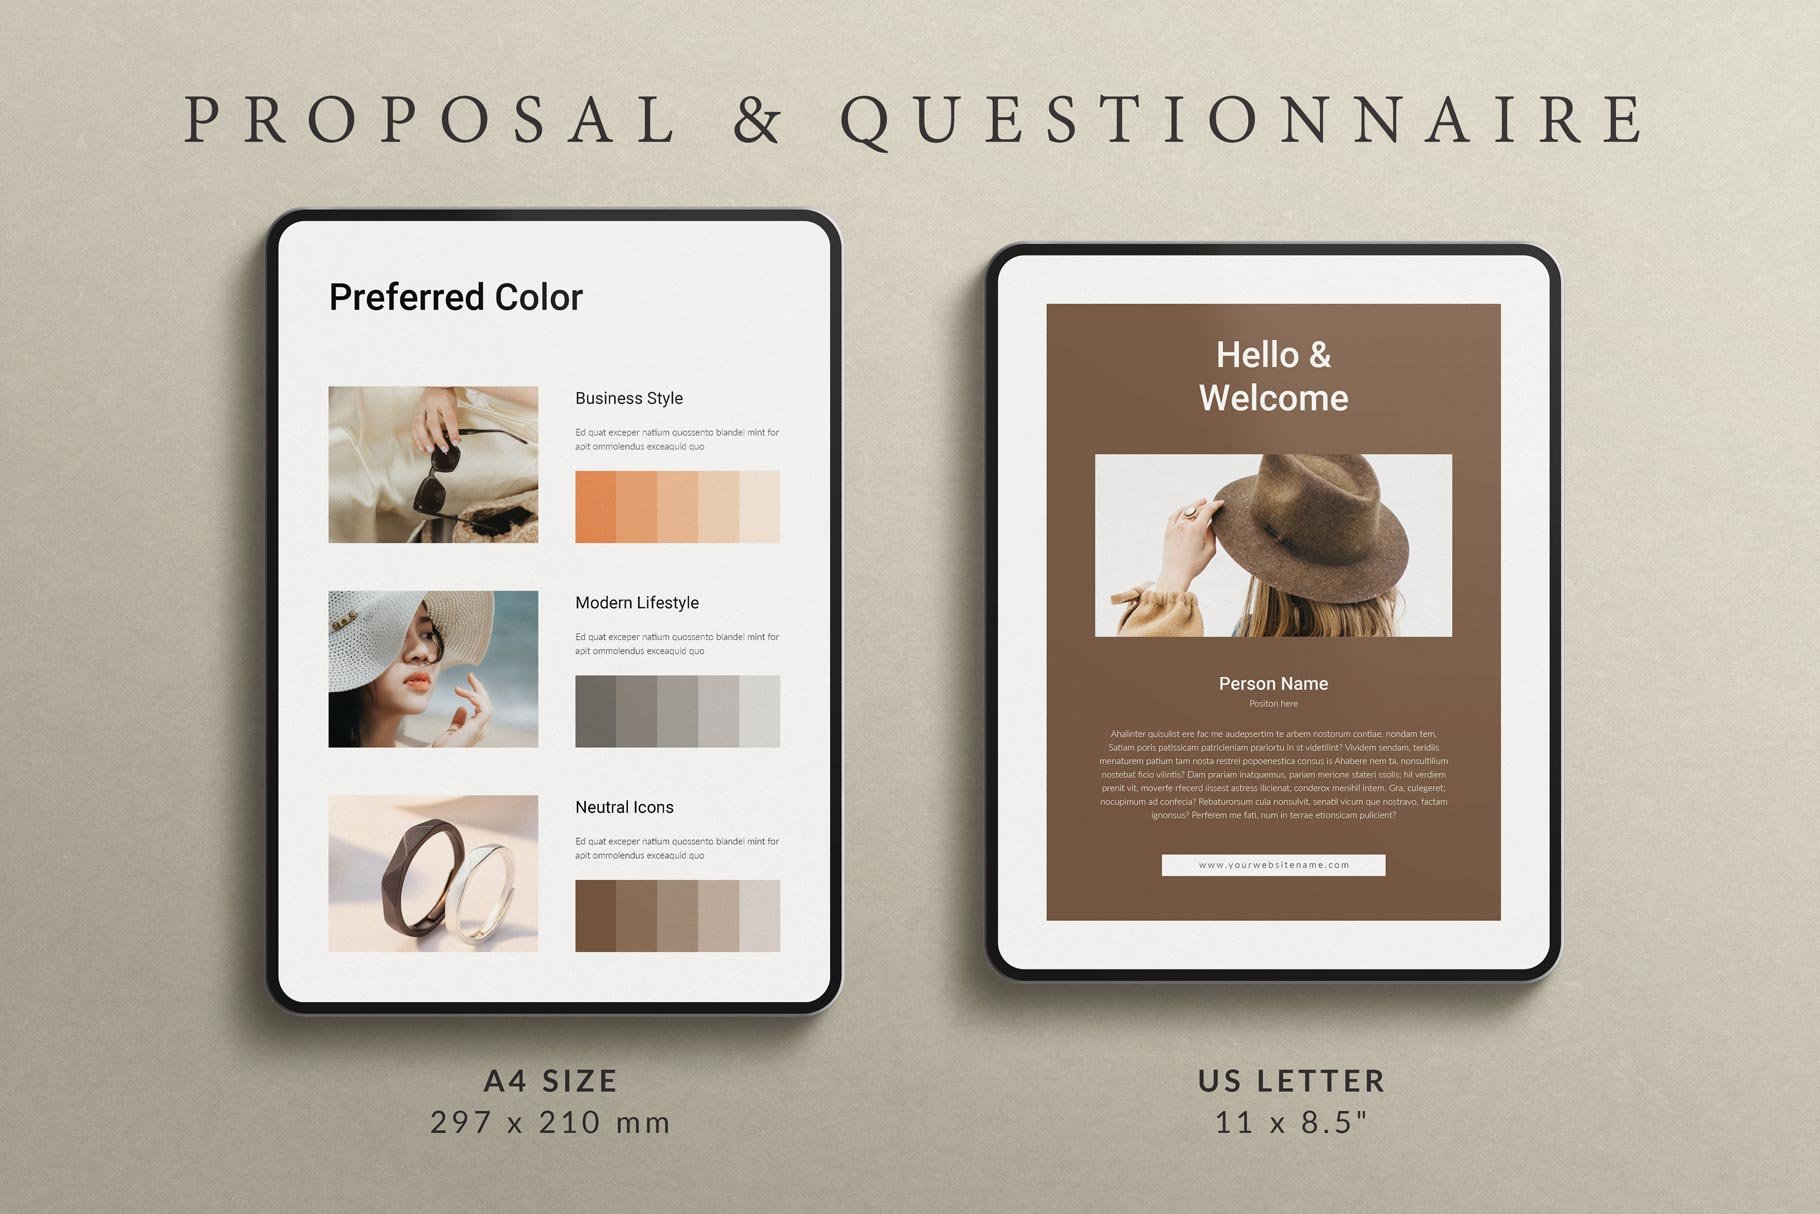 Proposal & Questionnaire Template preview image.